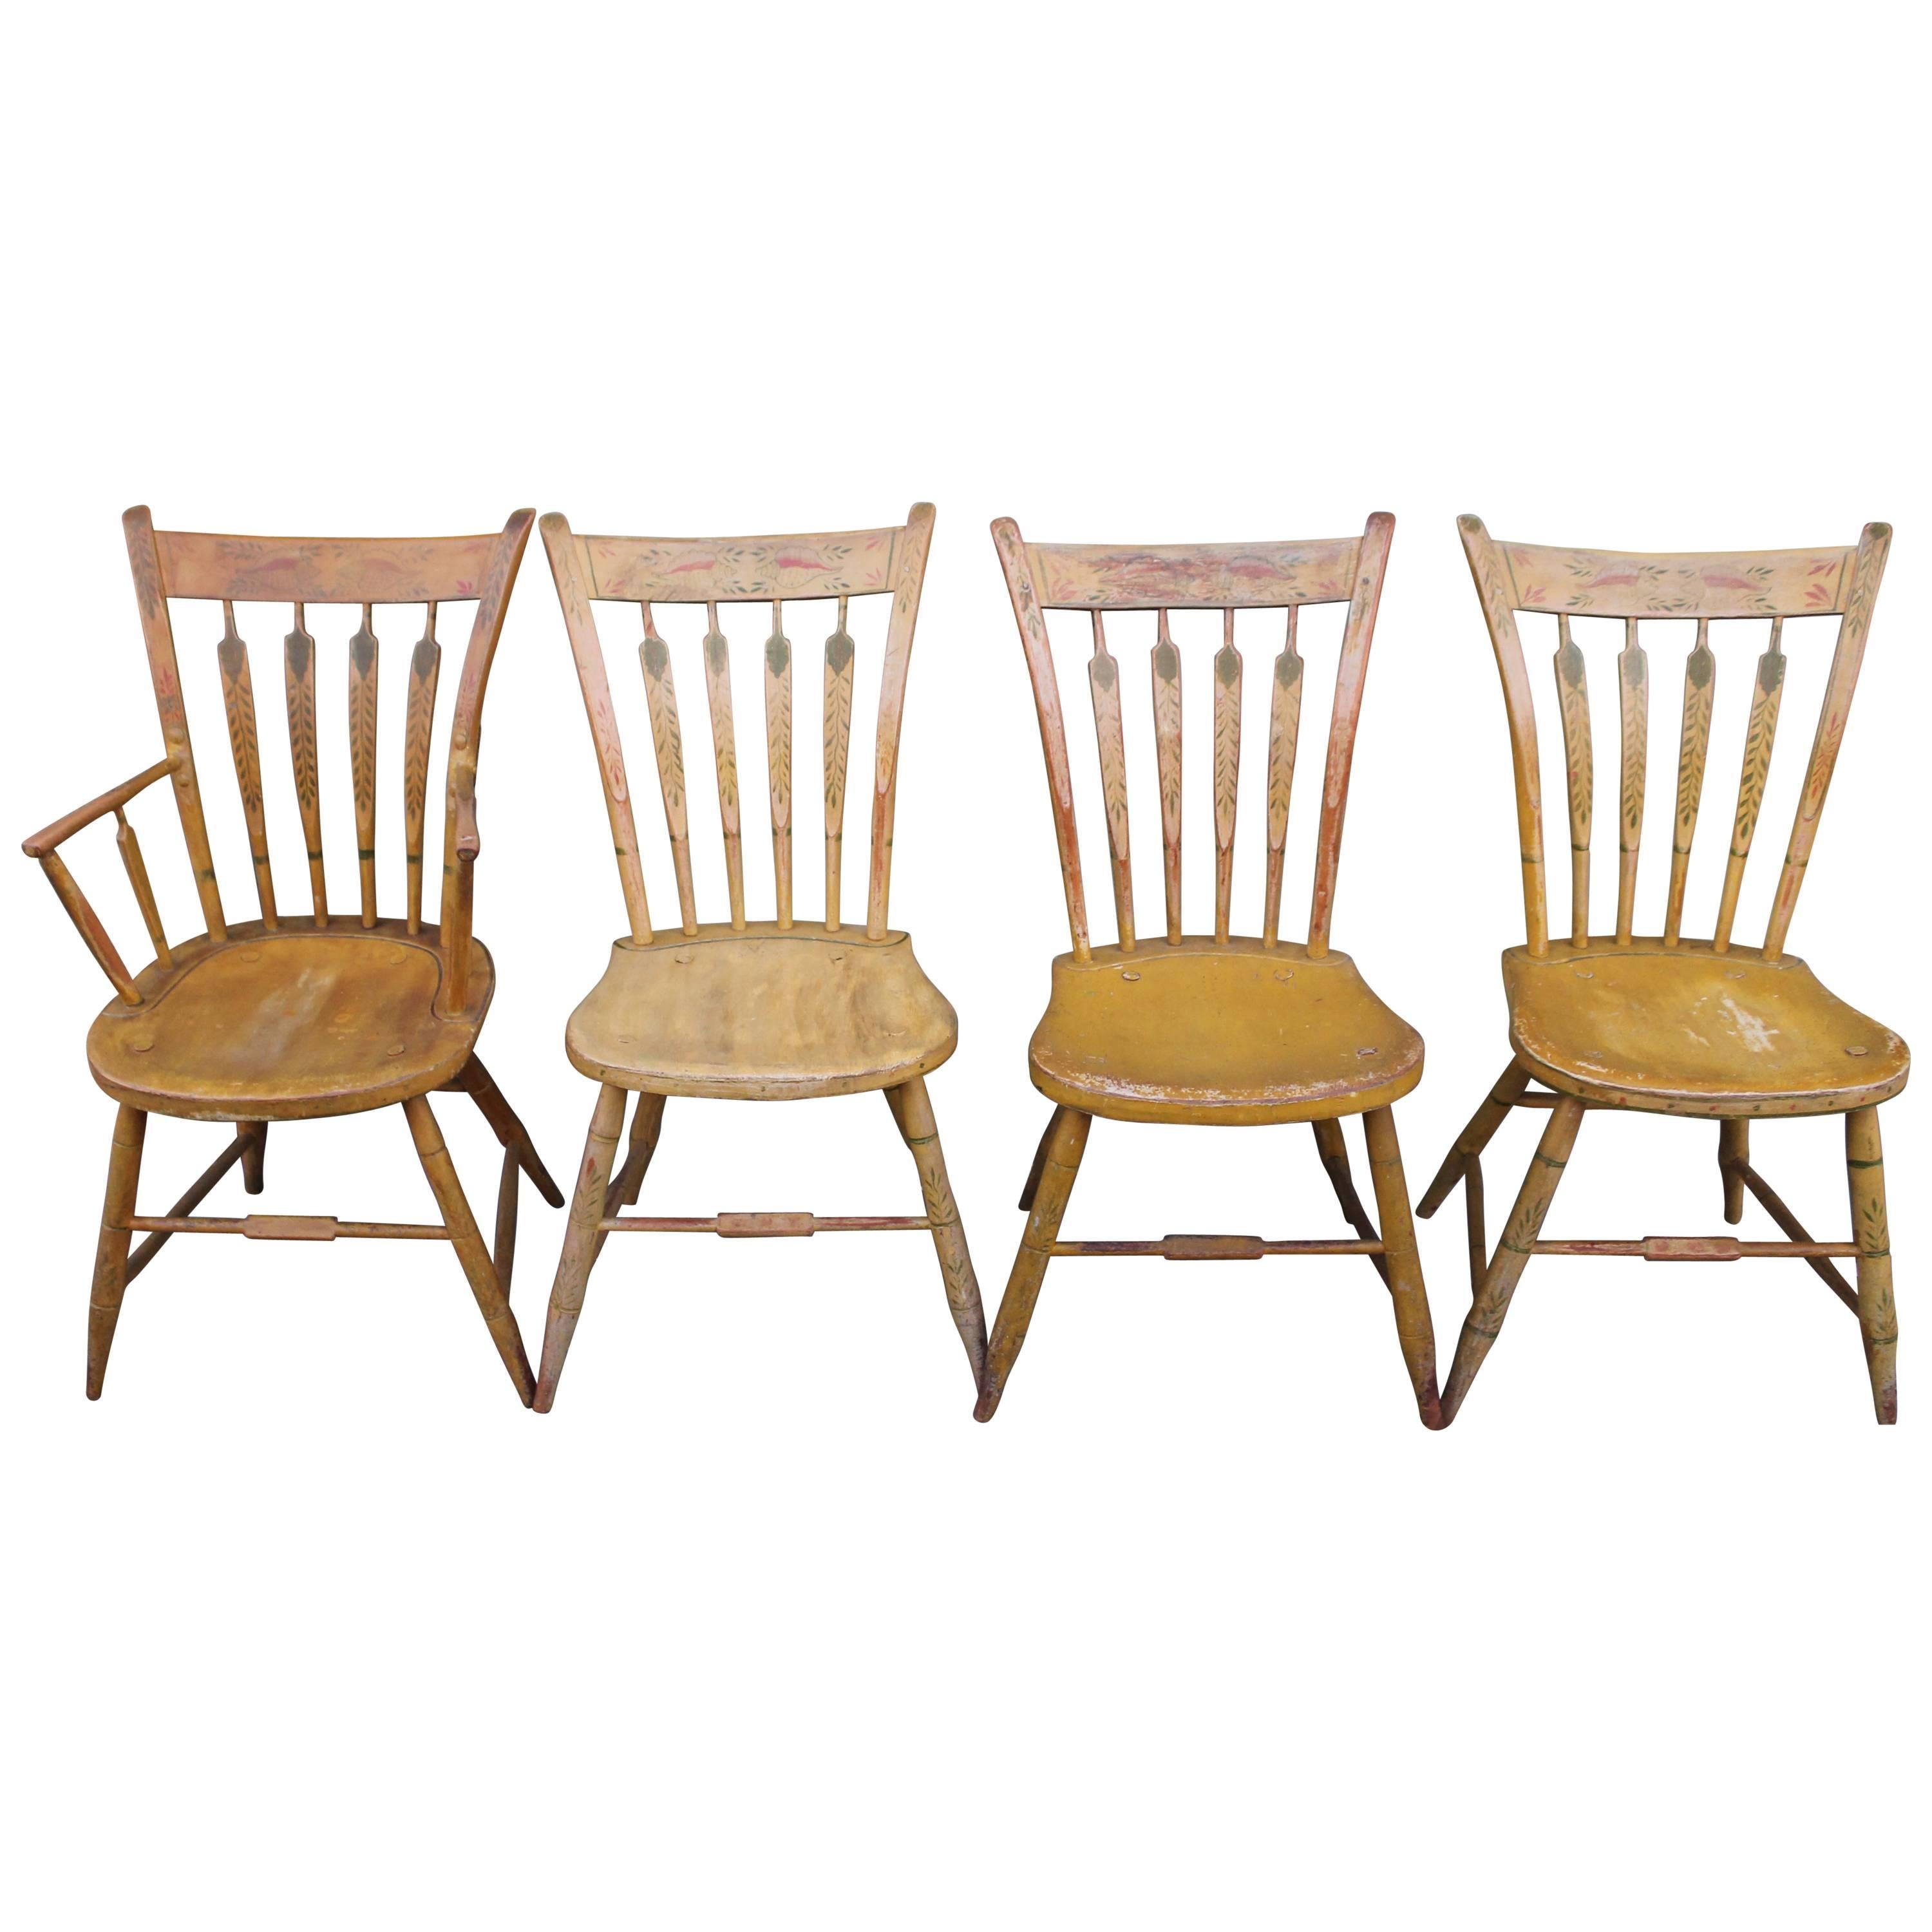  Set of Four 19th Century Mustard Original Painted Arrow Back Chairs